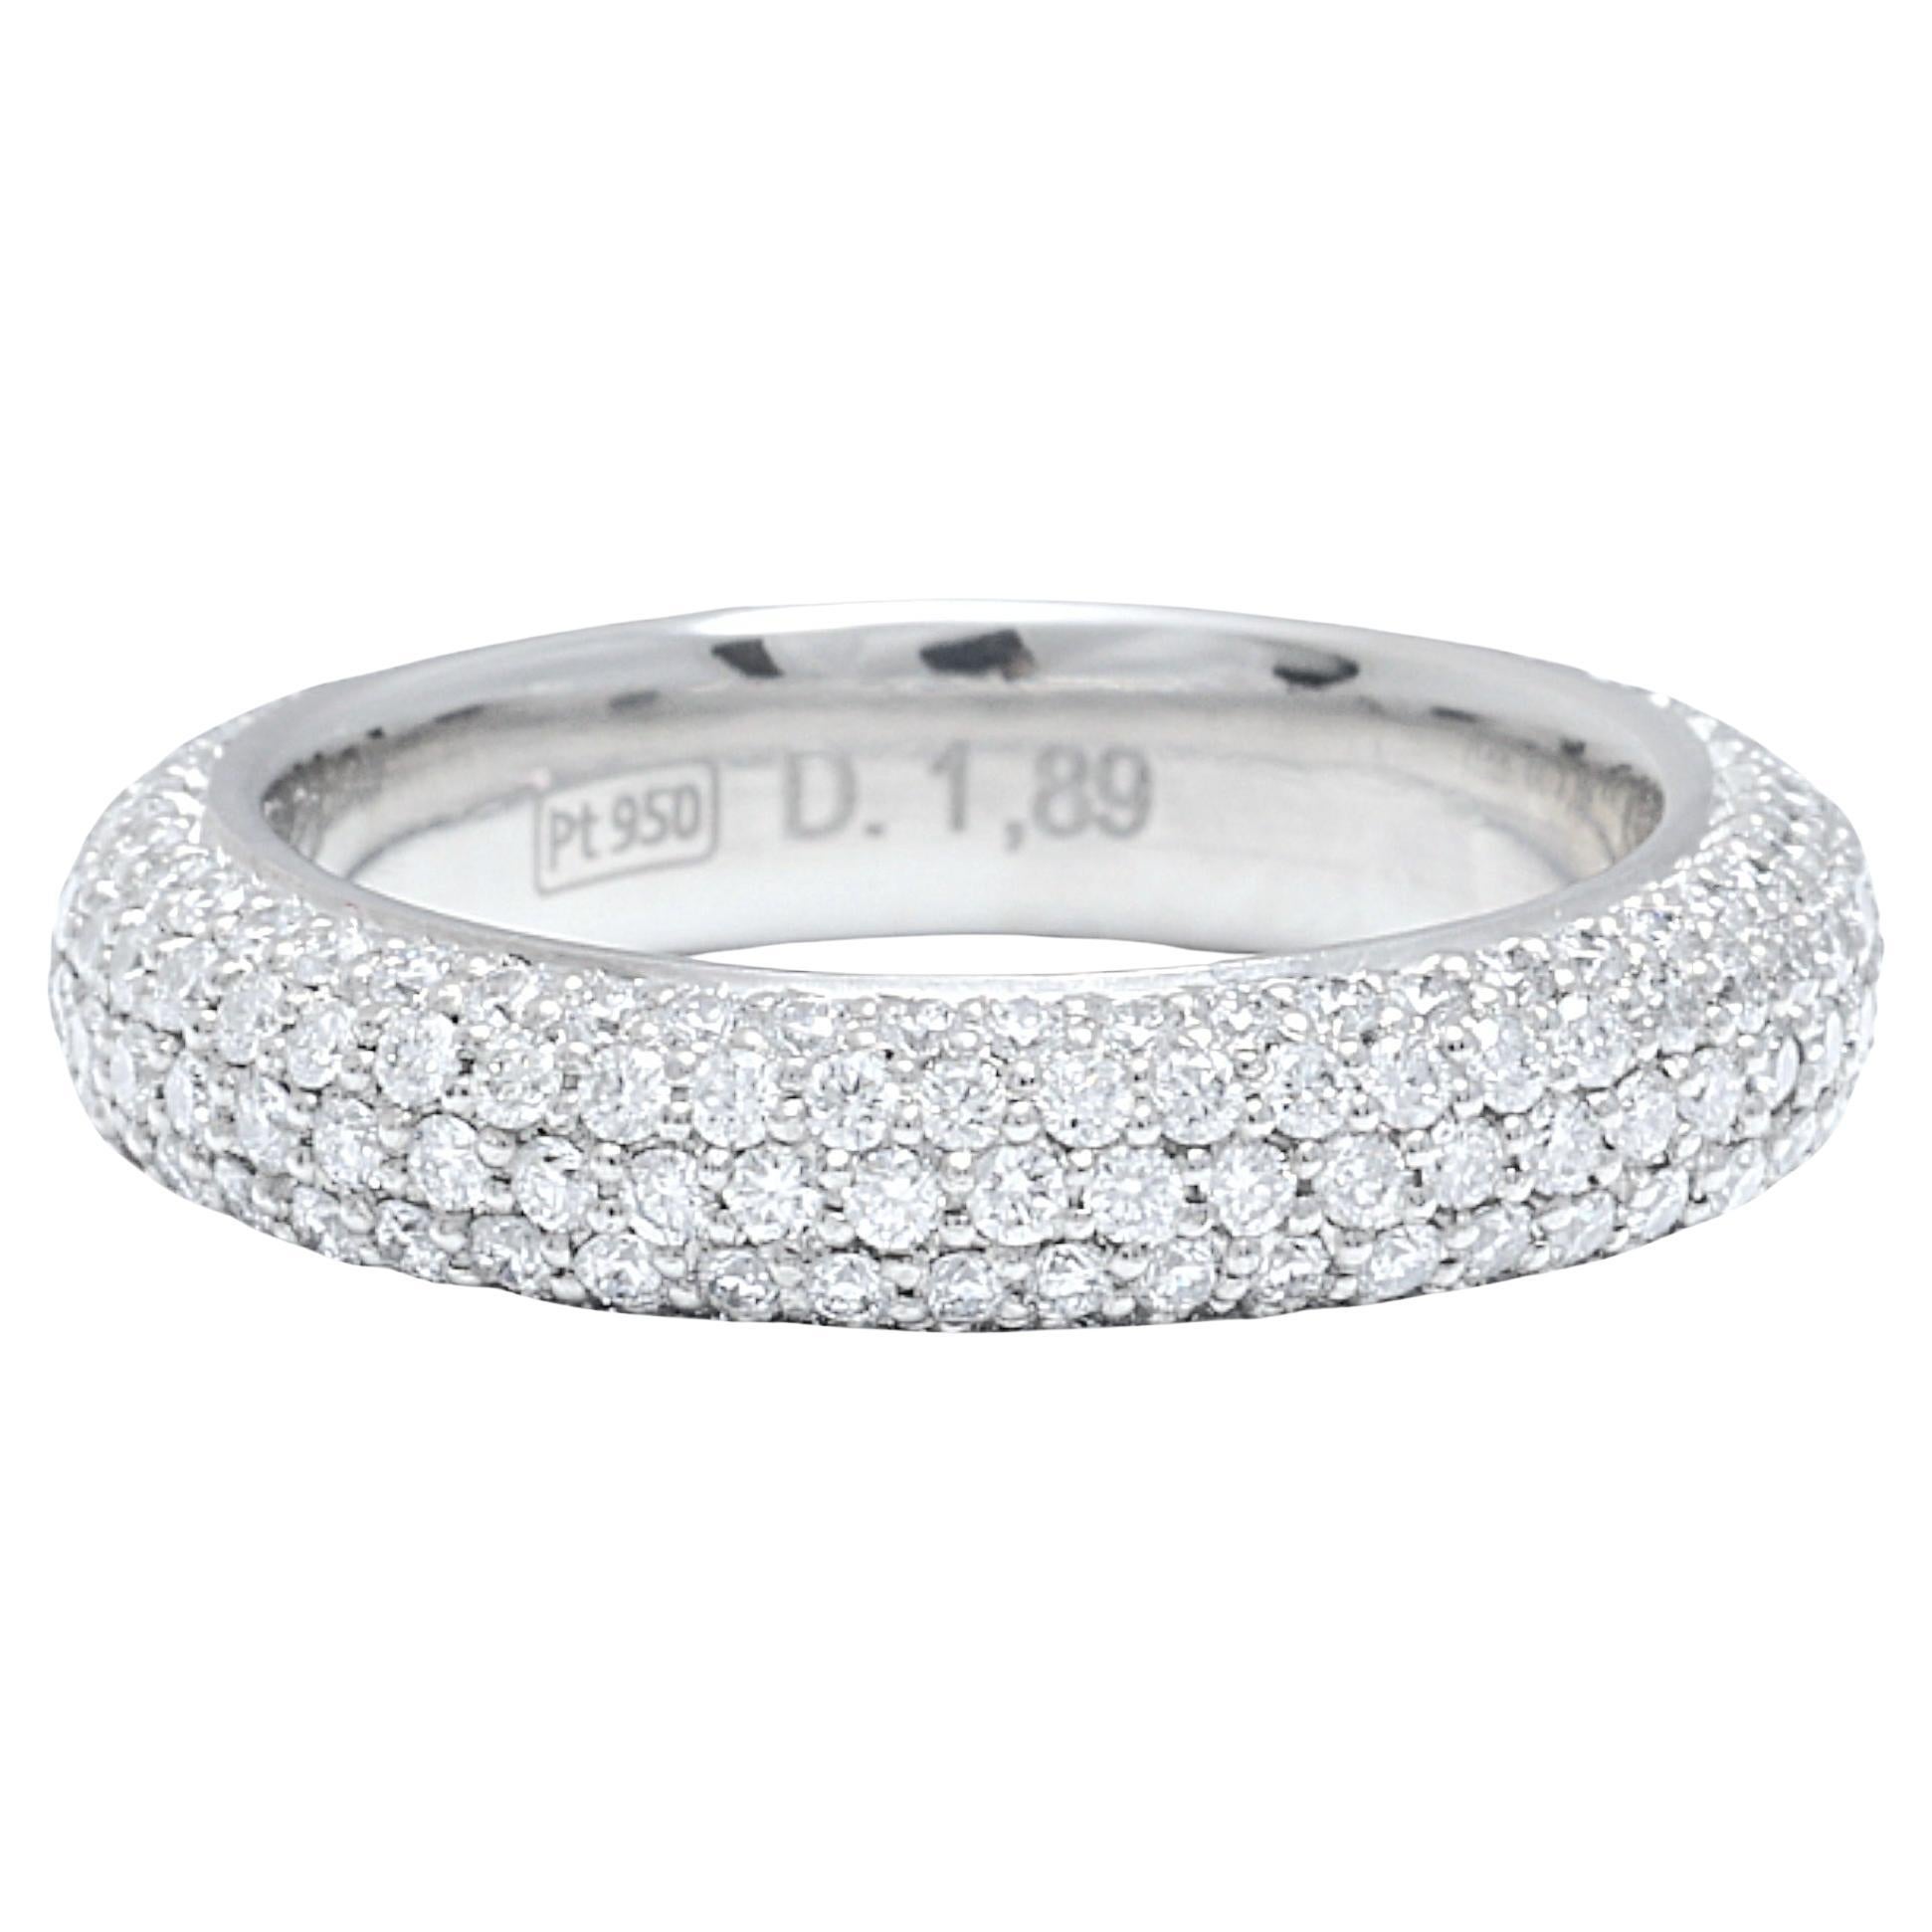 Platinum Eternity Ring with 1.89 ct. Diamonds Completely Hand Made For Sale